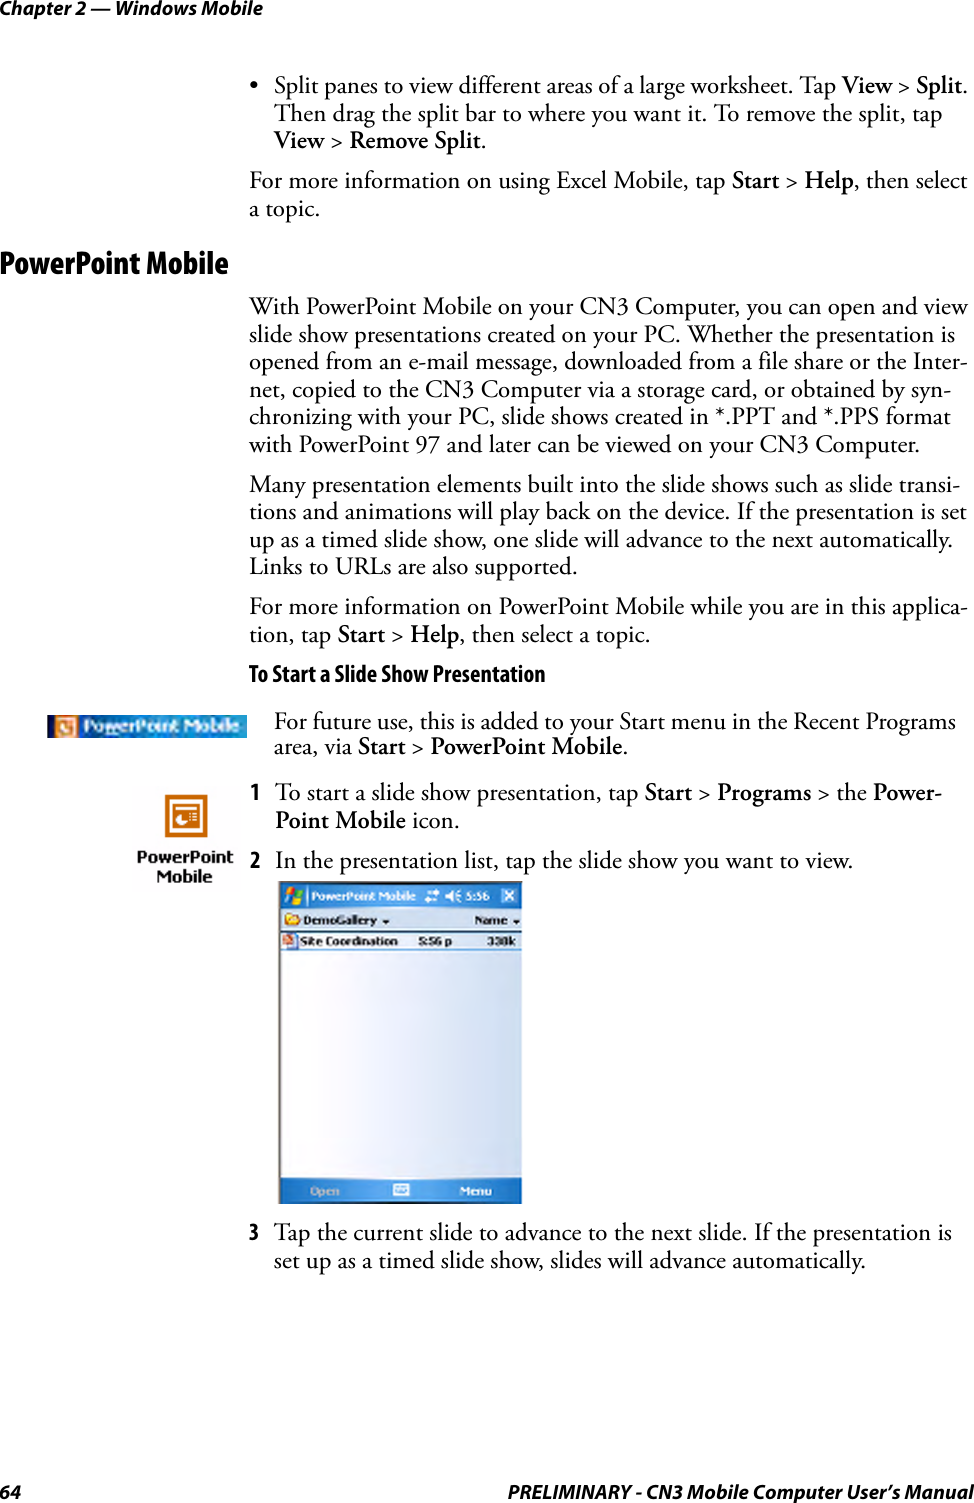 Chapter 2 — Windows Mobile64 PRELIMINARY - CN3 Mobile Computer User’s Manual• Split panes to view different areas of a large worksheet. Tap View &gt; Split. Then drag the split bar to where you want it. To remove the split, tap View &gt; Remove Split.For more information on using Excel Mobile, tap Start &gt; Help, then select a topic.PowerPoint MobileWith PowerPoint Mobile on your CN3 Computer, you can open and view slide show presentations created on your PC. Whether the presentation is opened from an e-mail message, downloaded from a file share or the Inter-net, copied to the CN3 Computer via a storage card, or obtained by syn-chronizing with your PC, slide shows created in *.PPT and *.PPS format with PowerPoint 97 and later can be viewed on your CN3 Computer.Many presentation elements built into the slide shows such as slide transi-tions and animations will play back on the device. If the presentation is set up as a timed slide show, one slide will advance to the next automatically. Links to URLs are also supported.For more information on PowerPoint Mobile while you are in this applica-tion, tap Start &gt; Help, then select a topic.To Start a Slide Show Presentation3Tap the current slide to advance to the next slide. If the presentation is set up as a timed slide show, slides will advance automatically.For future use, this is added to your Start menu in the Recent Programs area, via Start &gt; PowerPoint Mobile.1To start a slide show presentation, tap Start &gt; Programs &gt; the Power-Point Mobile icon. 2In the presentation list, tap the slide show you want to view.